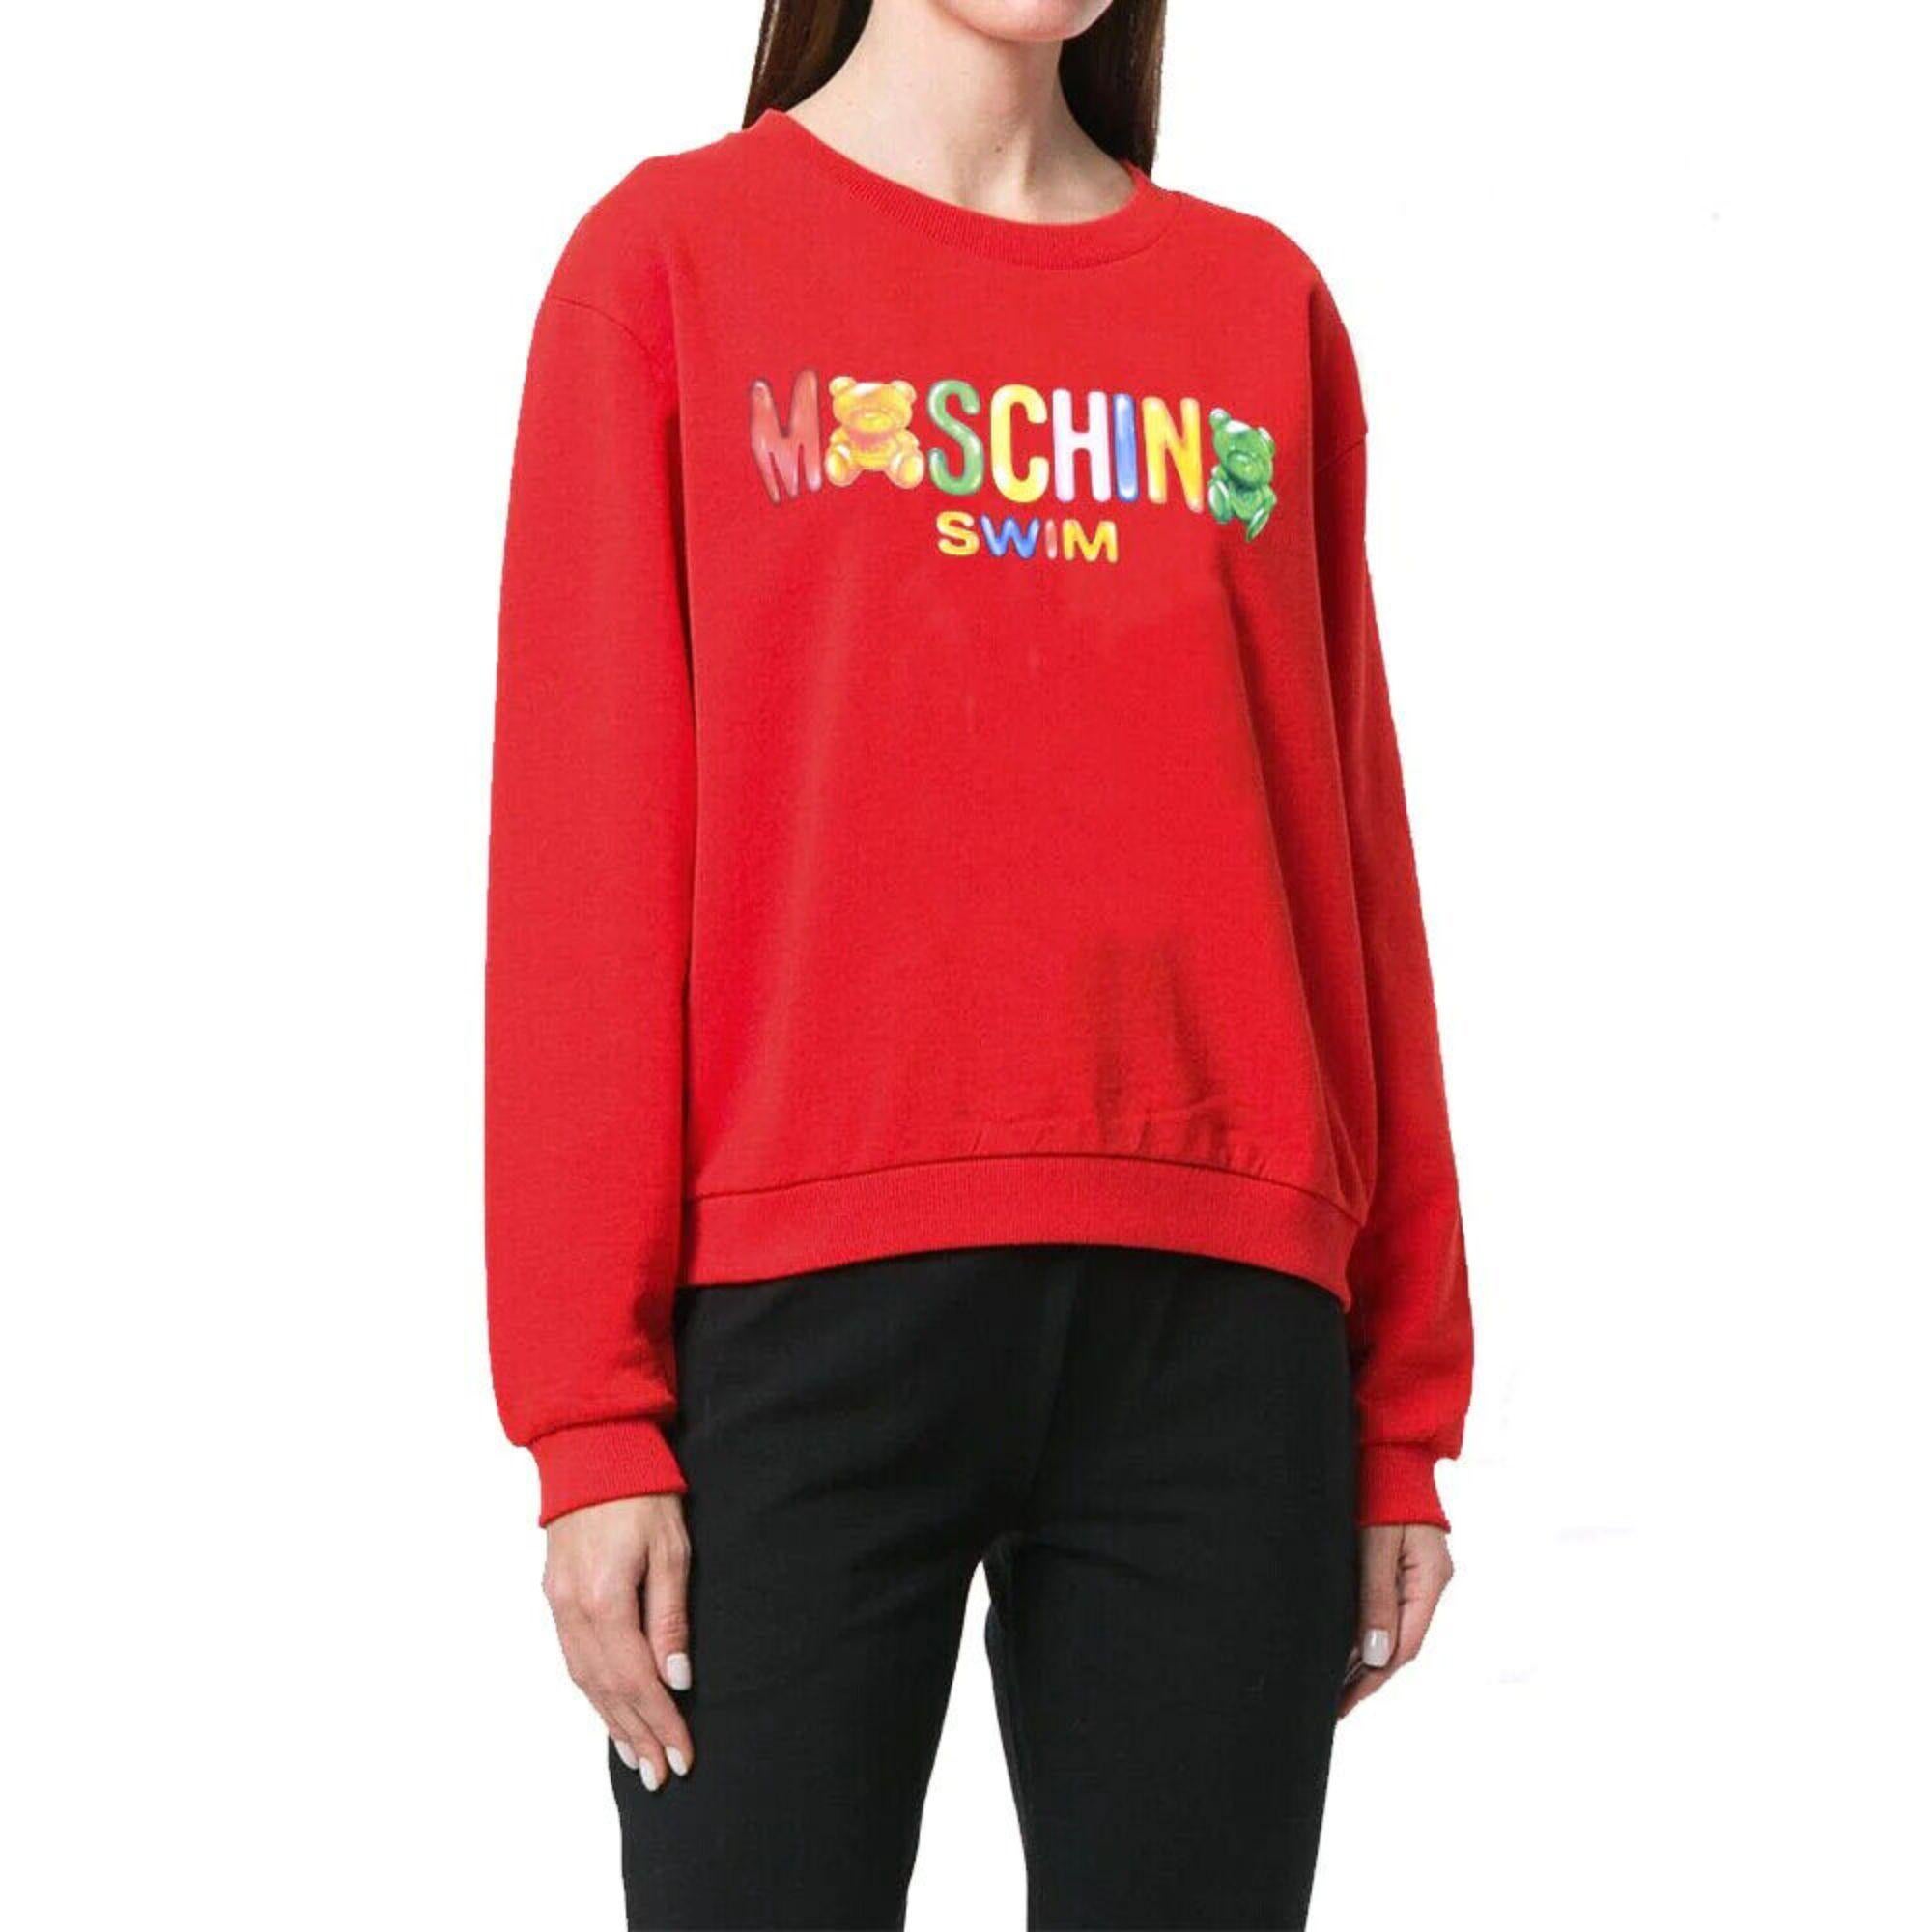 SS19 Moschino Swim Jeremy Scott Swim Jelly Gummy Teddy Bear Red Sweatshirt Candy

Additional Information:
Material: 100% Cotton
Color: Red
Size: XL / US L
Style: Pullover
Pattern: Logo, Gummy Bear
Dimensions: Shoulder to shoulder 18.5